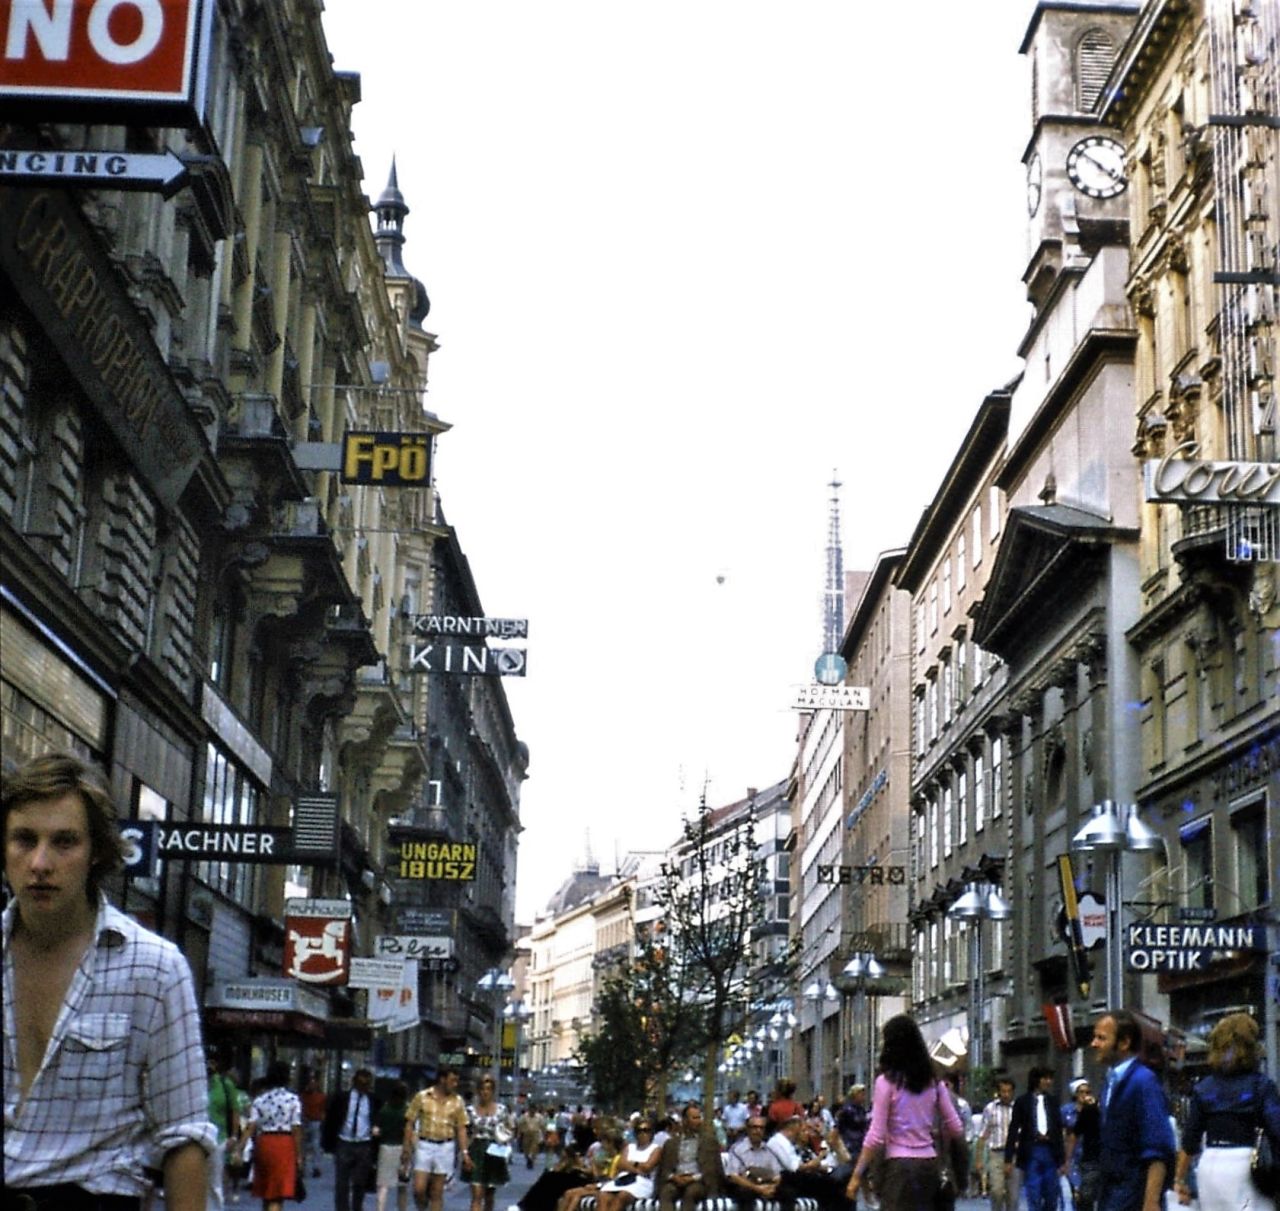 <strong>Capturing the moment: </strong>On his travels, Thomas tried to avoid getting people in his photos, but now the pictures with people in -- like this one of Kärntner Straße, Vienna -- are some of his favorites.